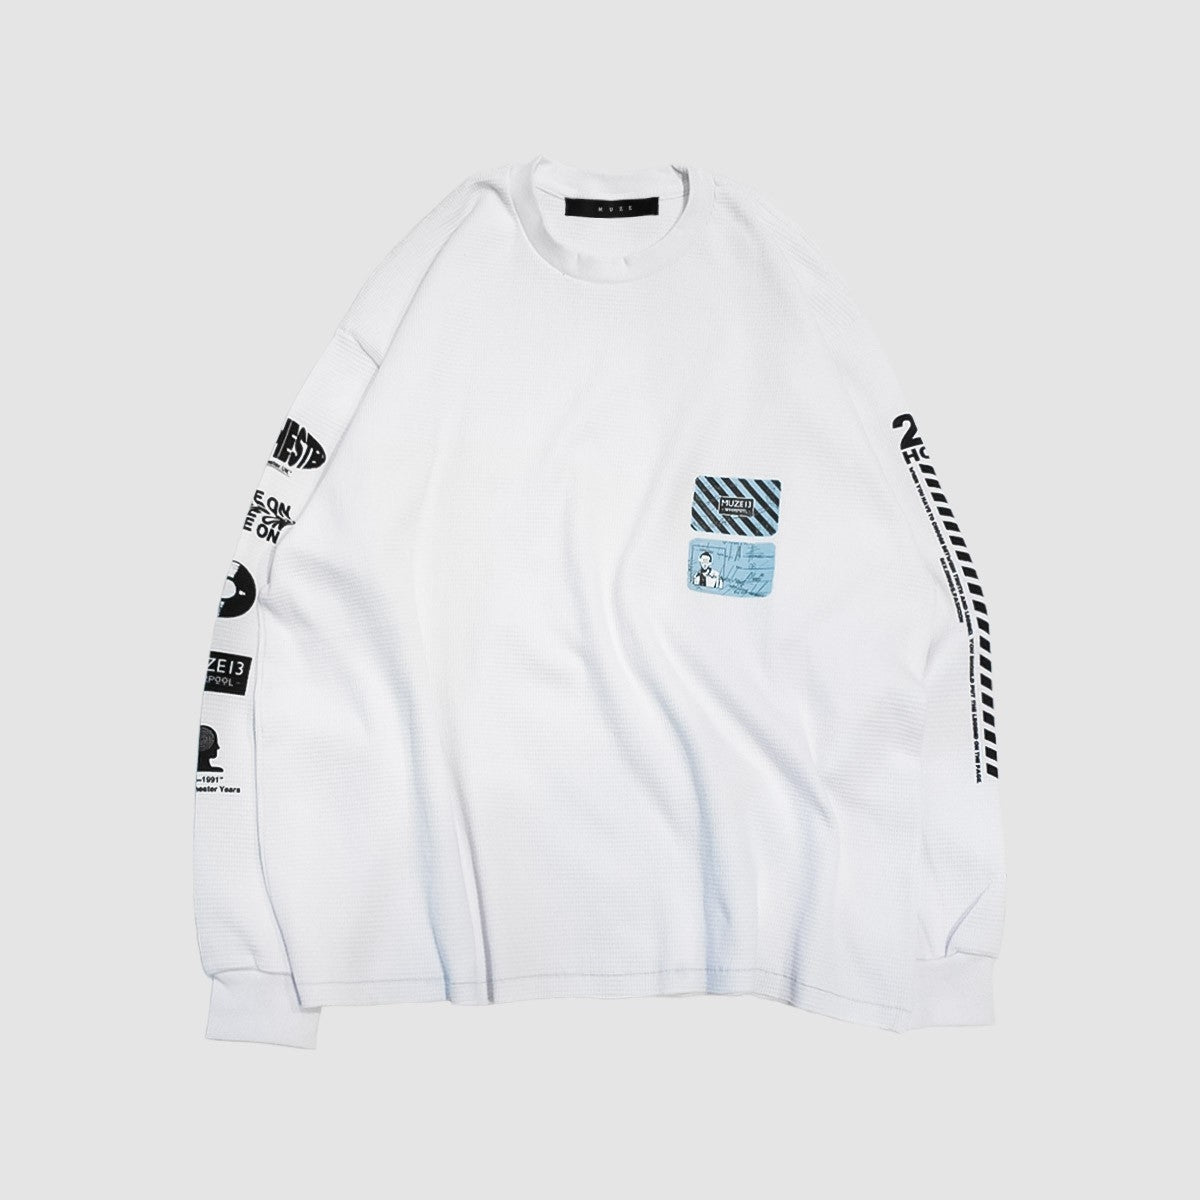 MUZE BLACK LABEL - 24HOUR PARTY PEOPLE THERMAL L/S TEE(WHITE)ミューズ サーマル ロング スリーブ Tシャツ ホワイト